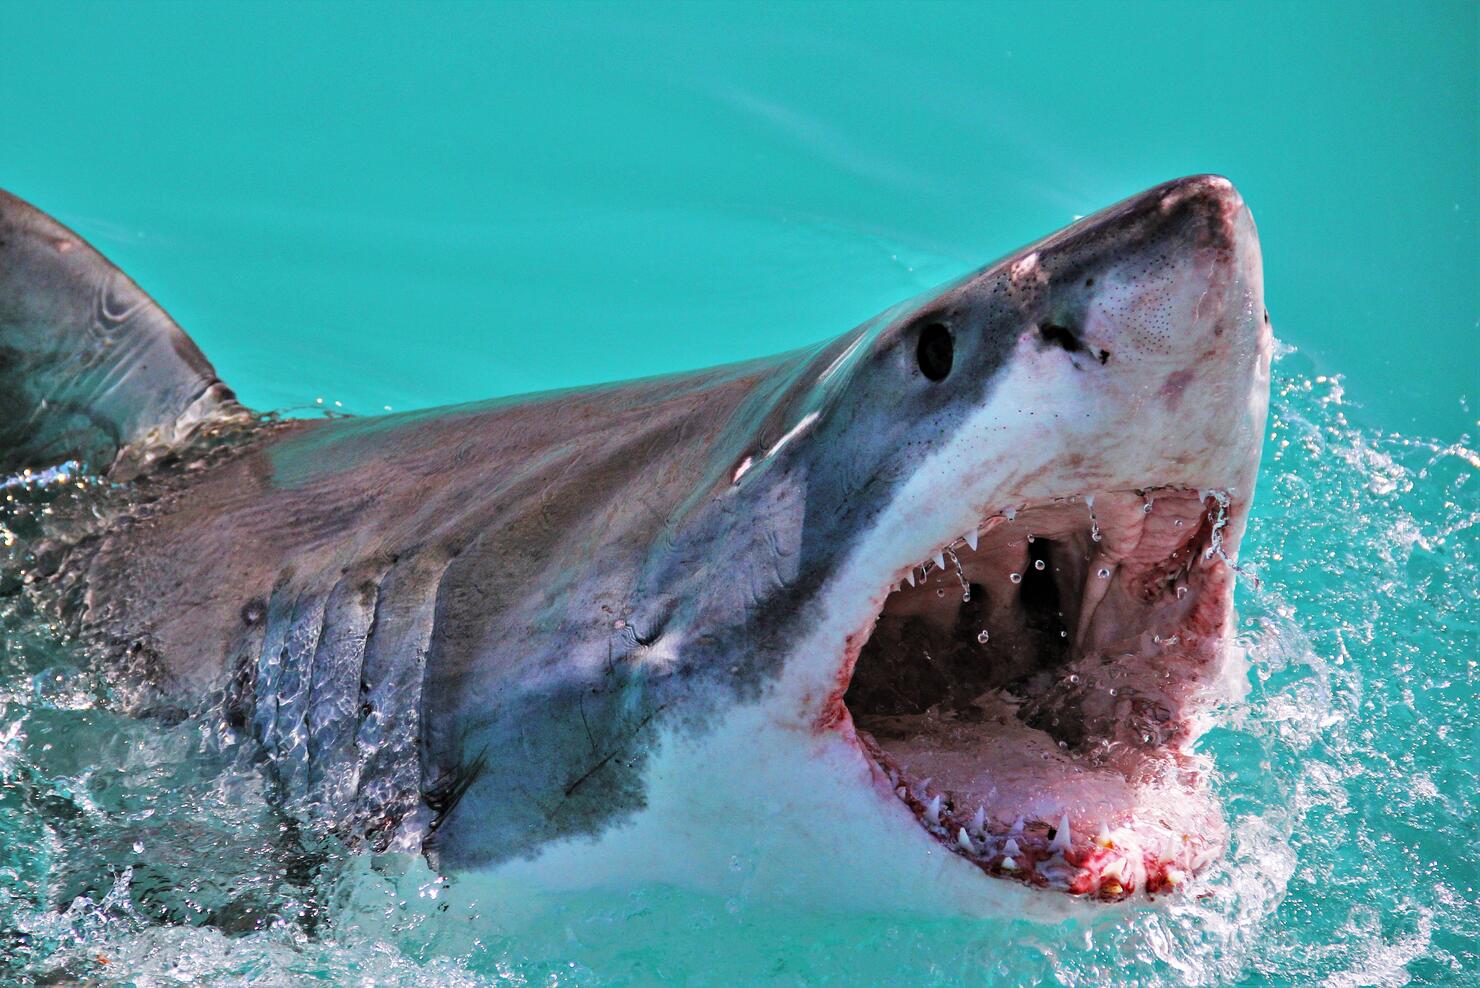 Close-Up Of Shark Swimming In Water